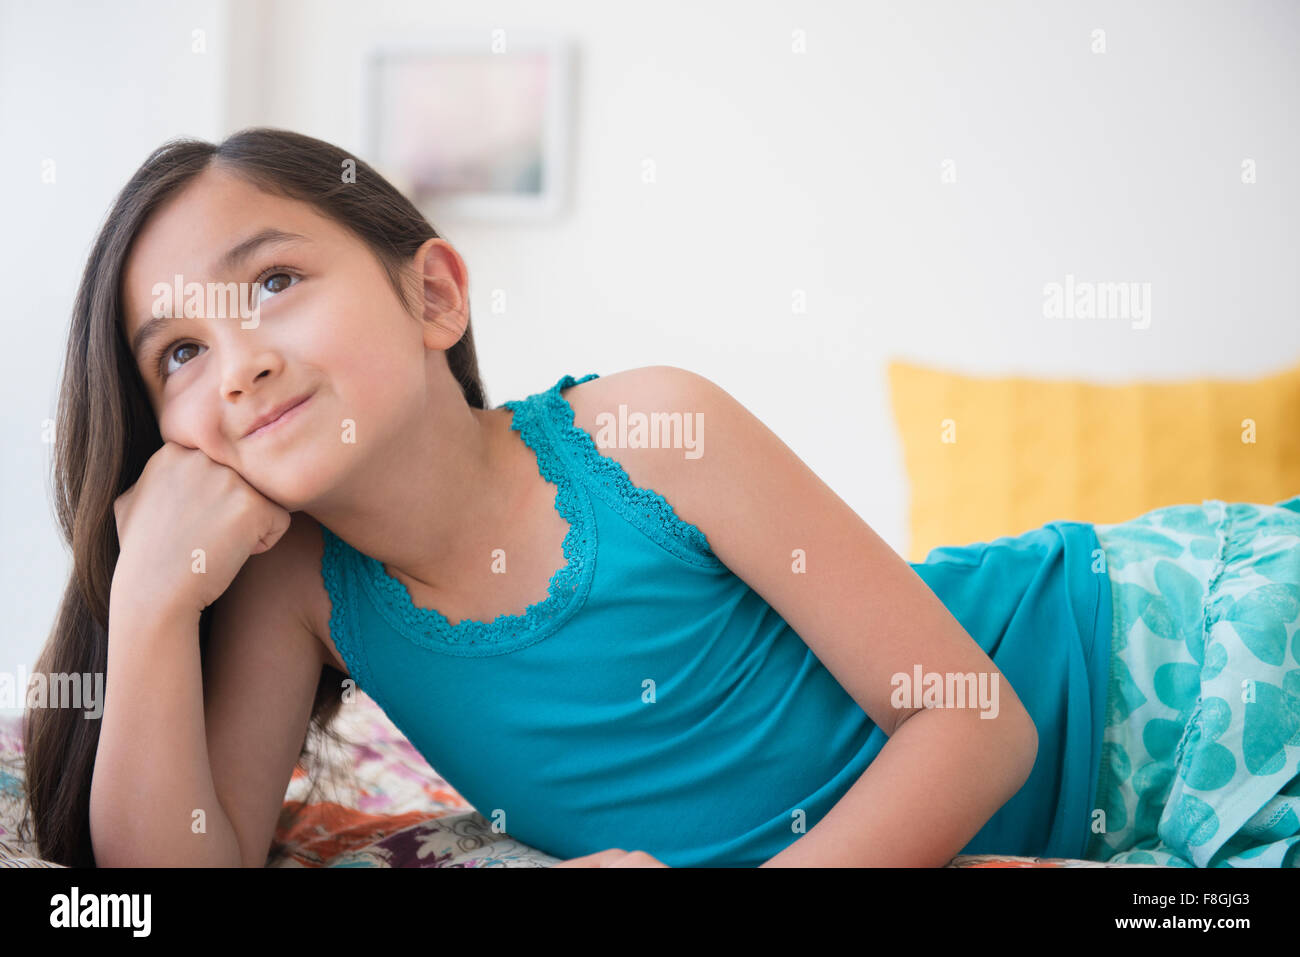 Smiling girl daydreaming with chin in hand Stock Photo